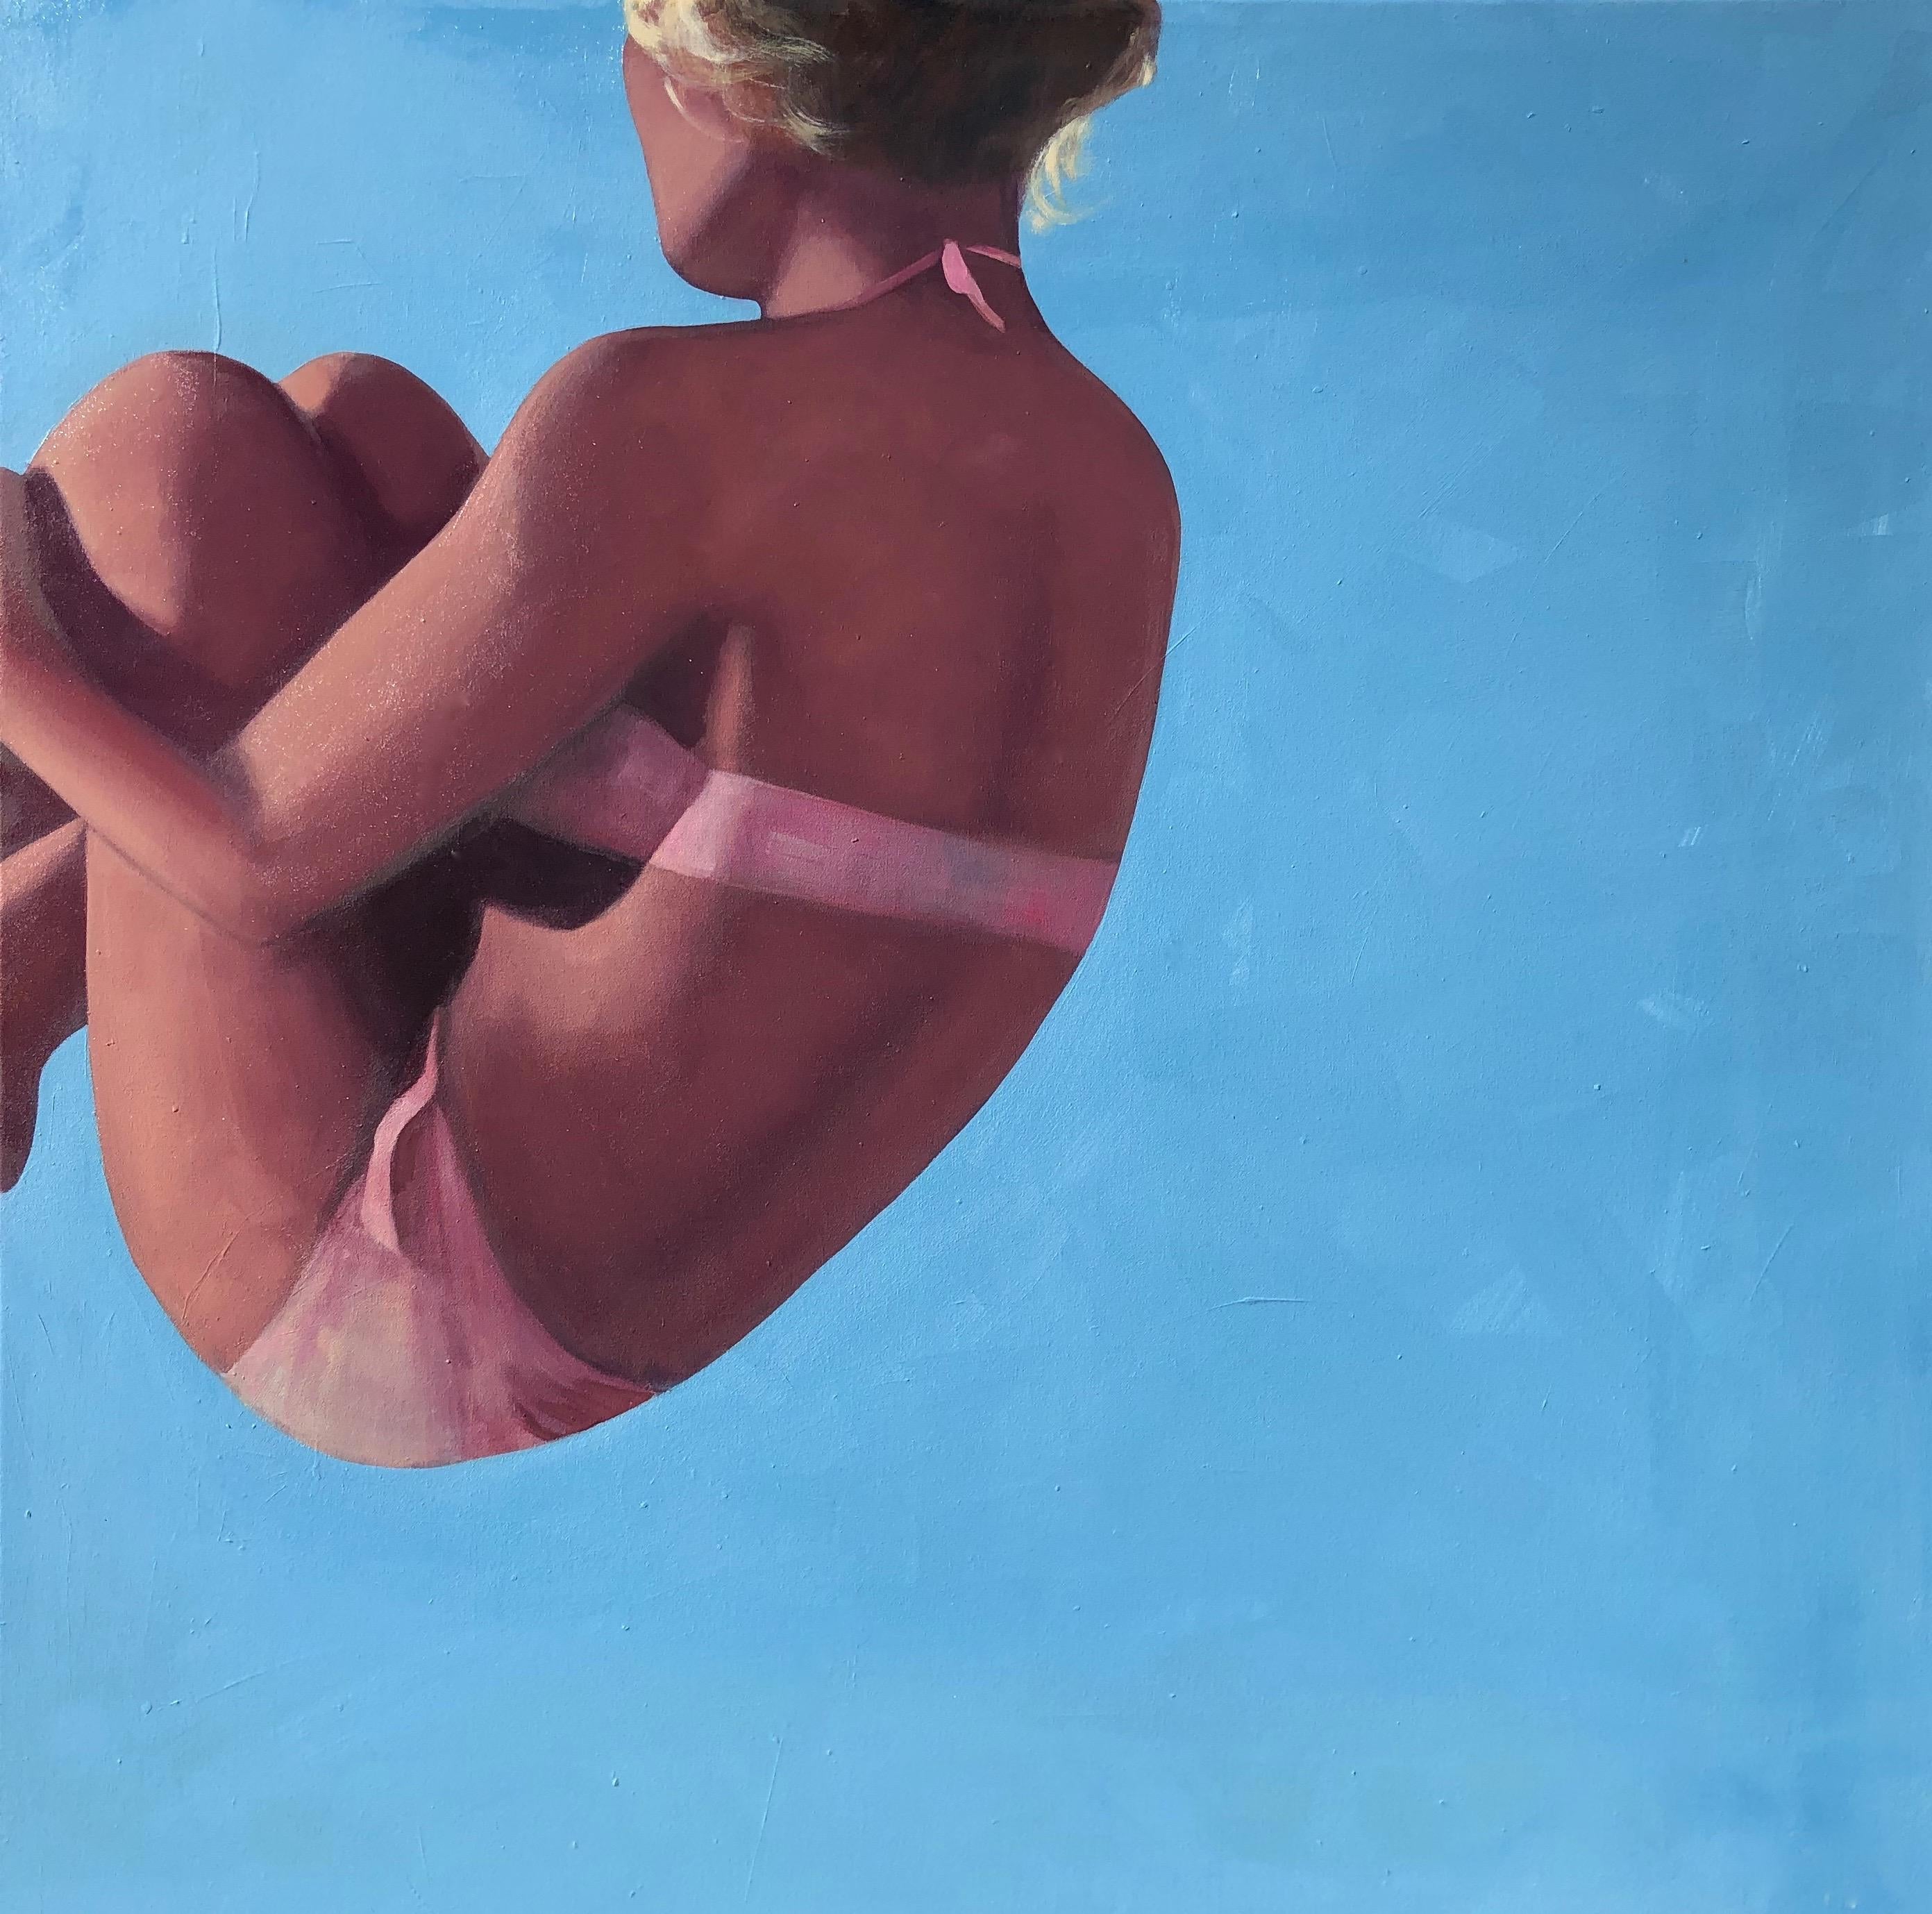 T.S. Harris Figurative Painting - "Head Over Heels" oil painting of a woman in pink bikini somersaulting in air